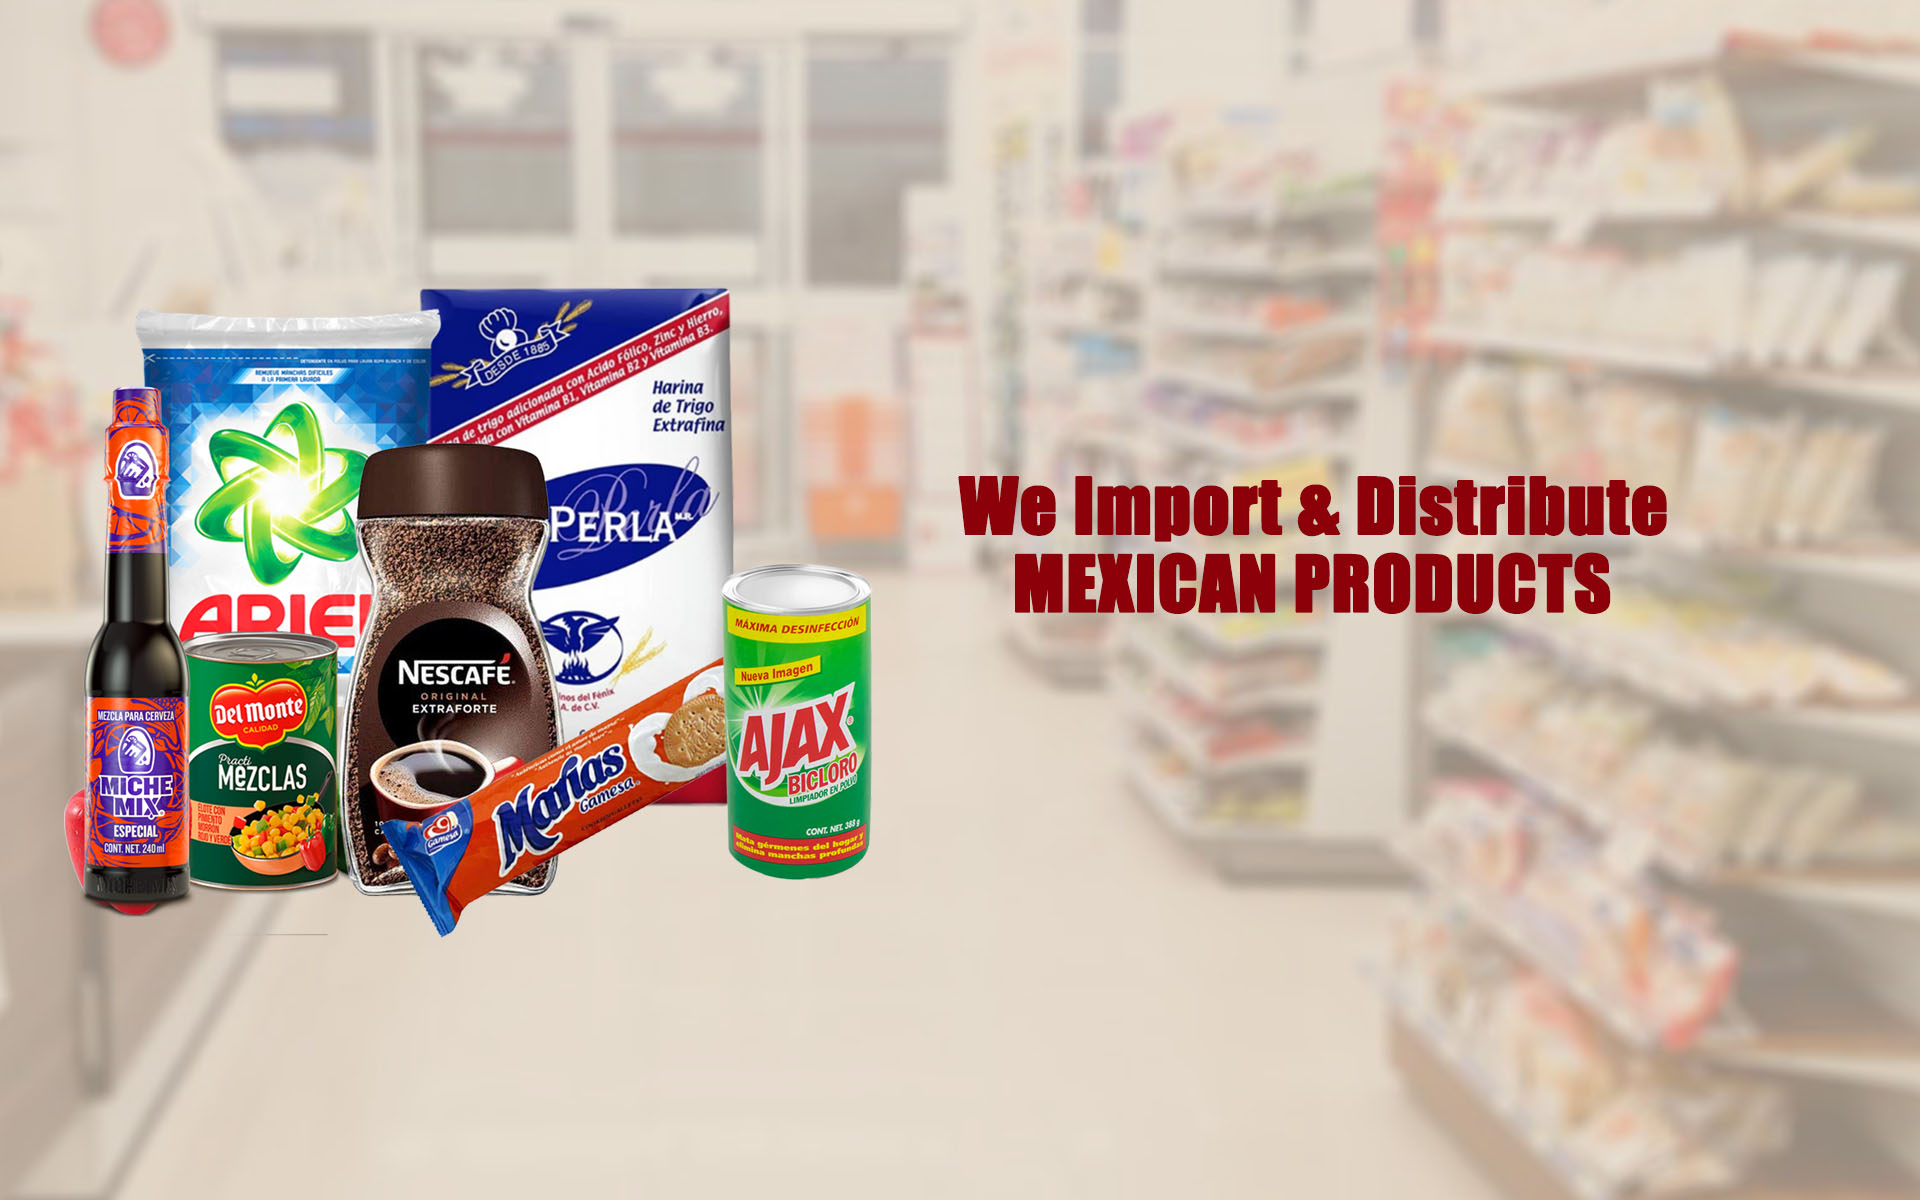 We import and distribute Mexican groceries